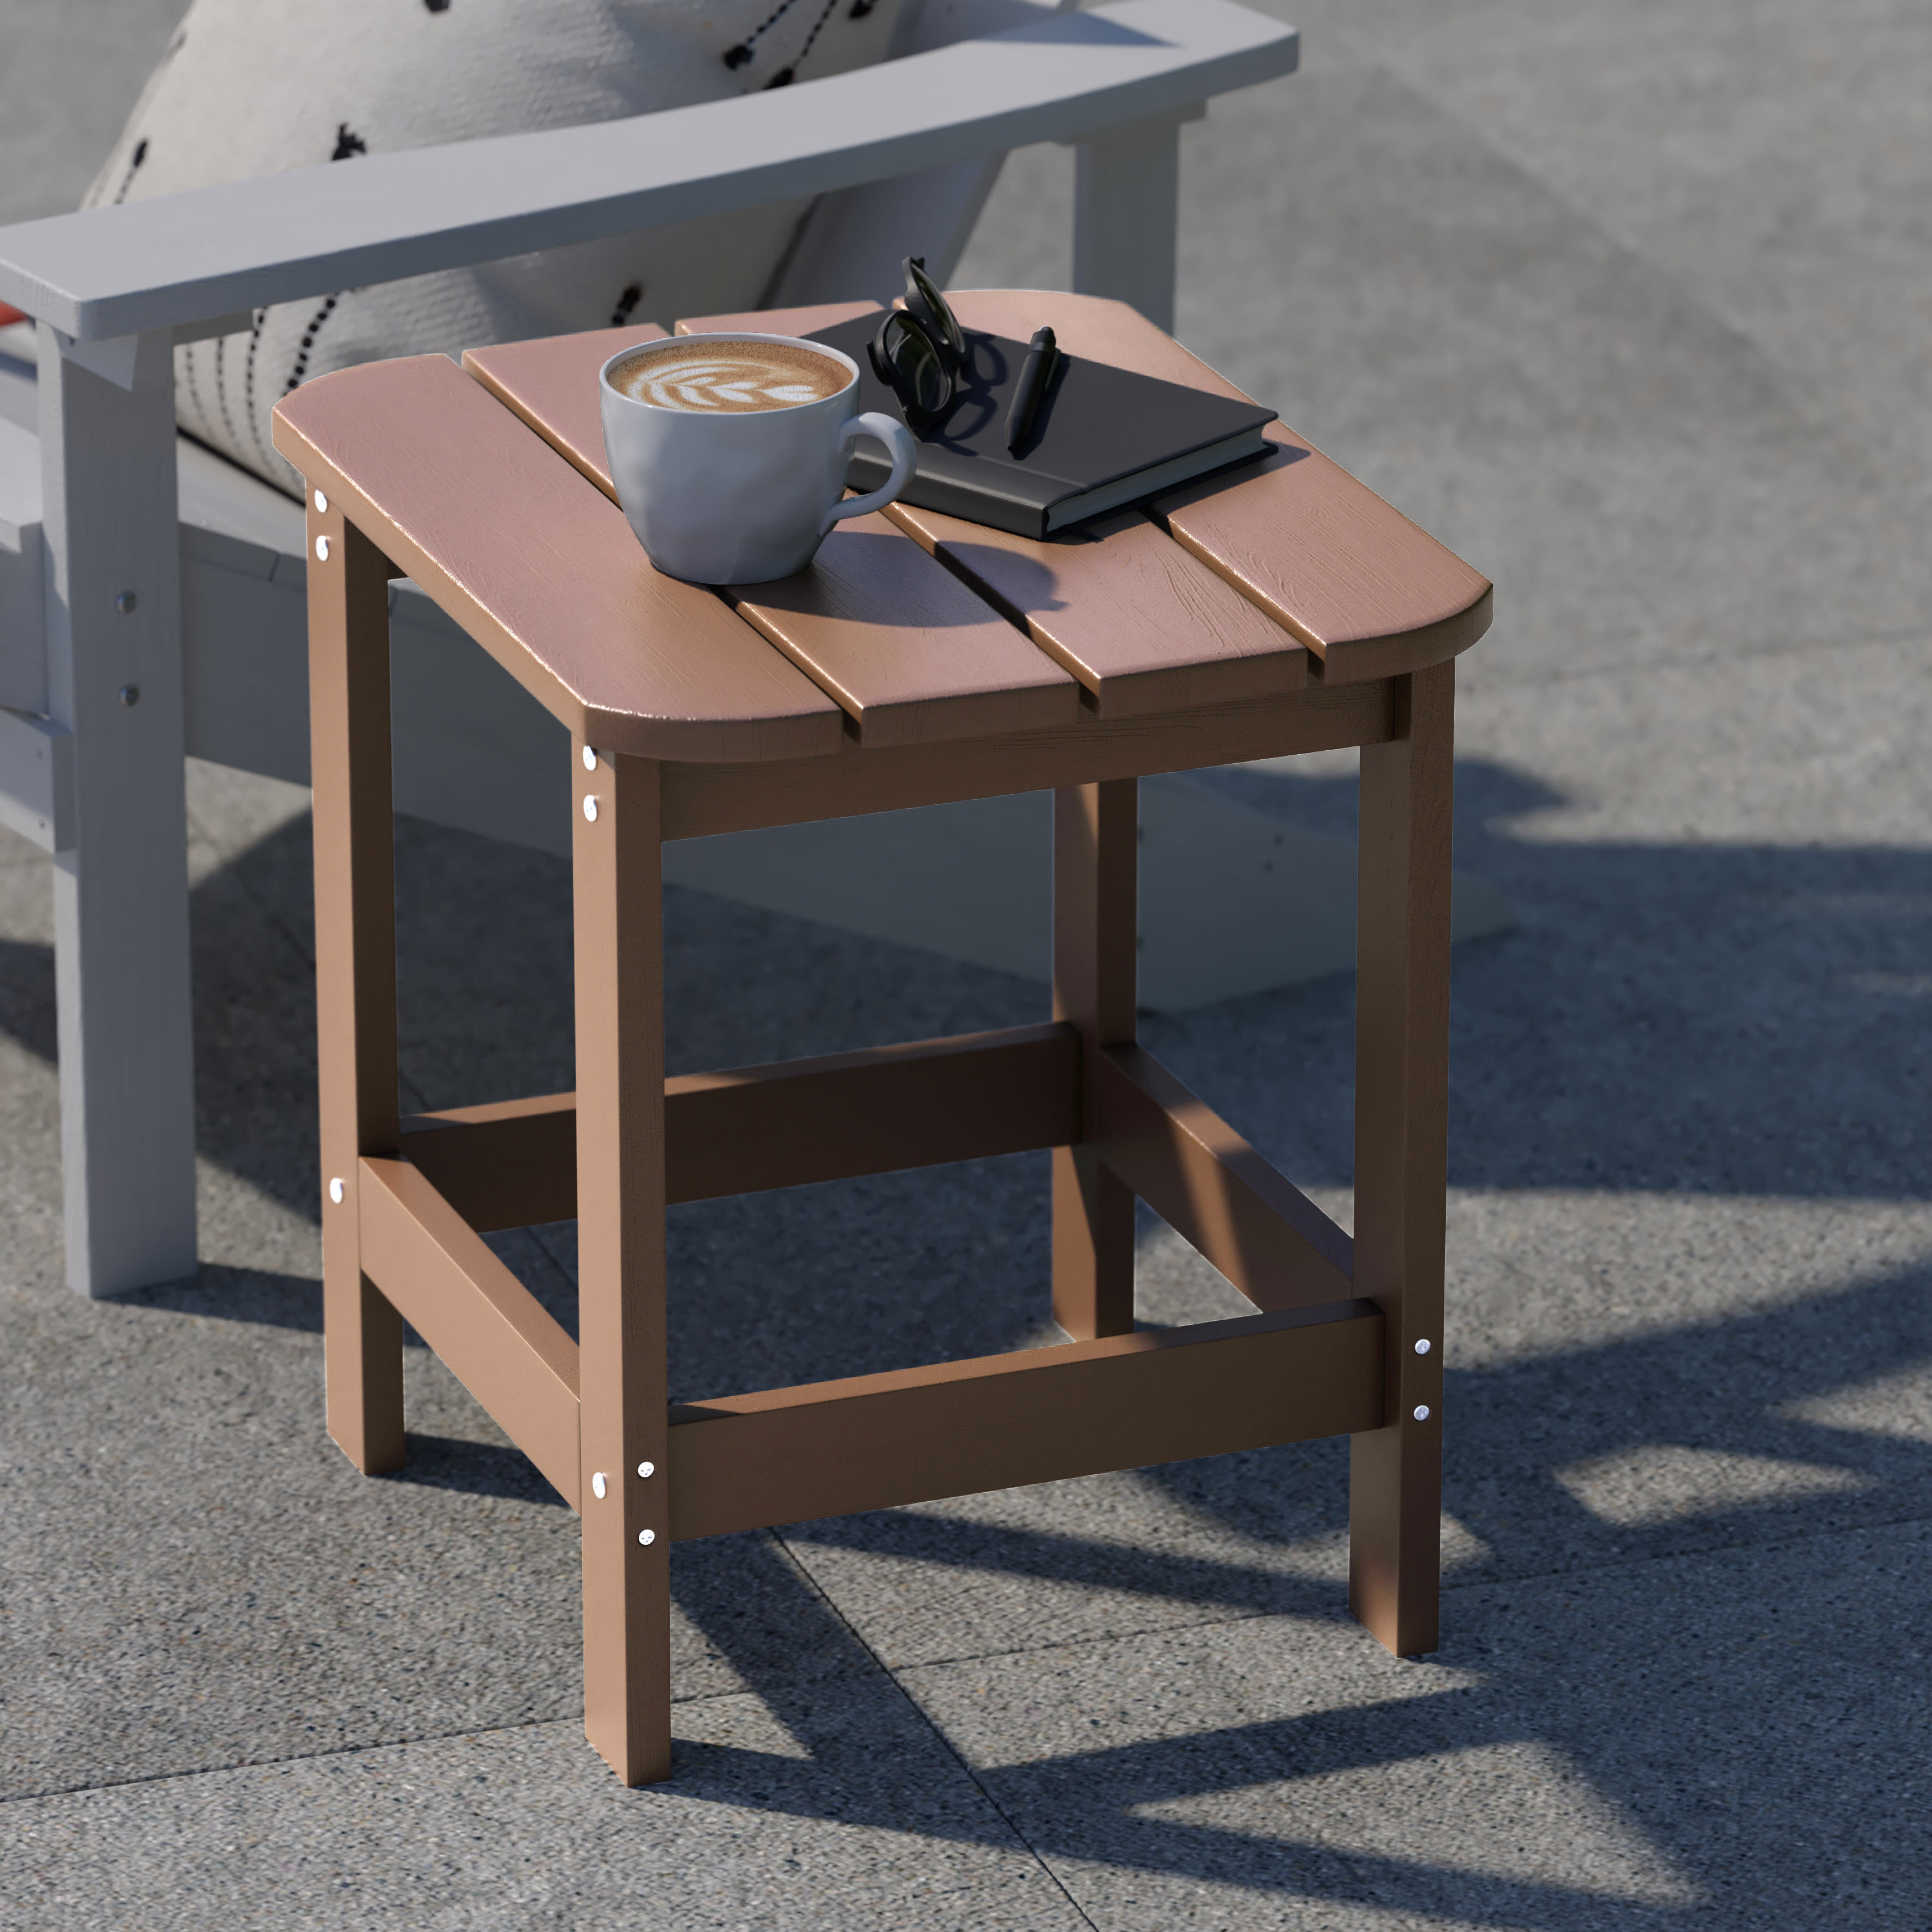 Flash Furniture Charlestown All-Weather Poly Resin Wood Commercial Grade Adirondack Side Table in Natural Cedar - image 3 of 11